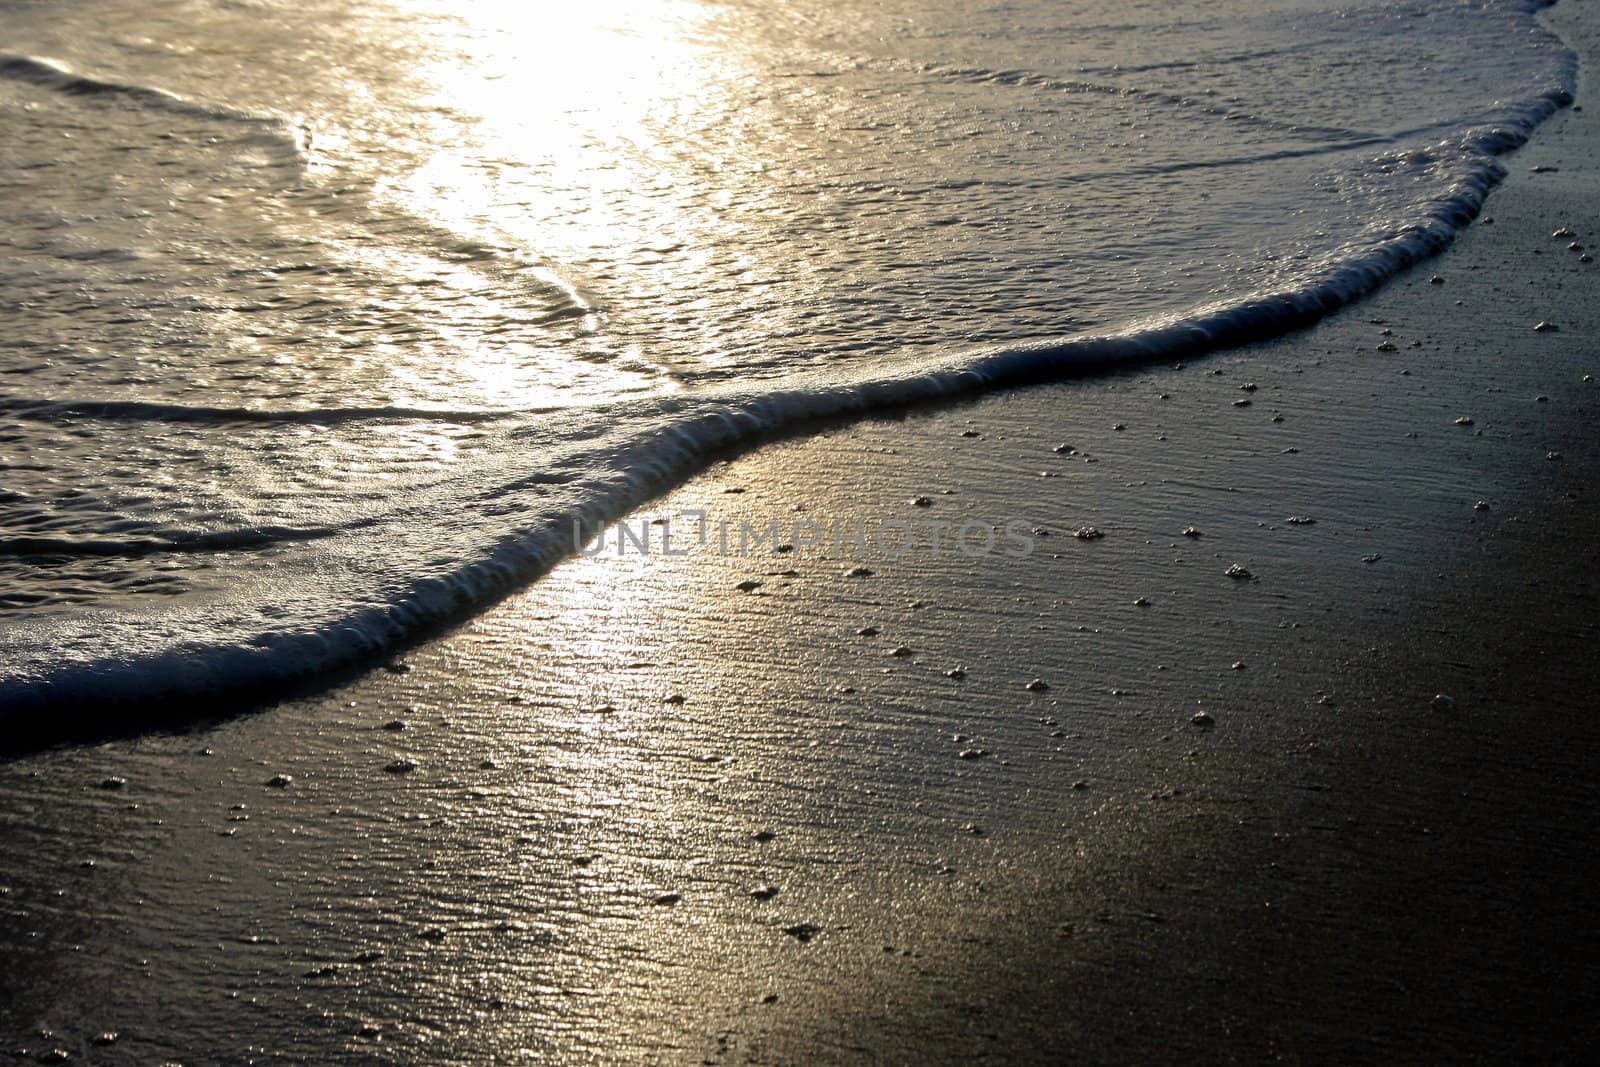 Waves coming ashore, at sunset, beach and foam.